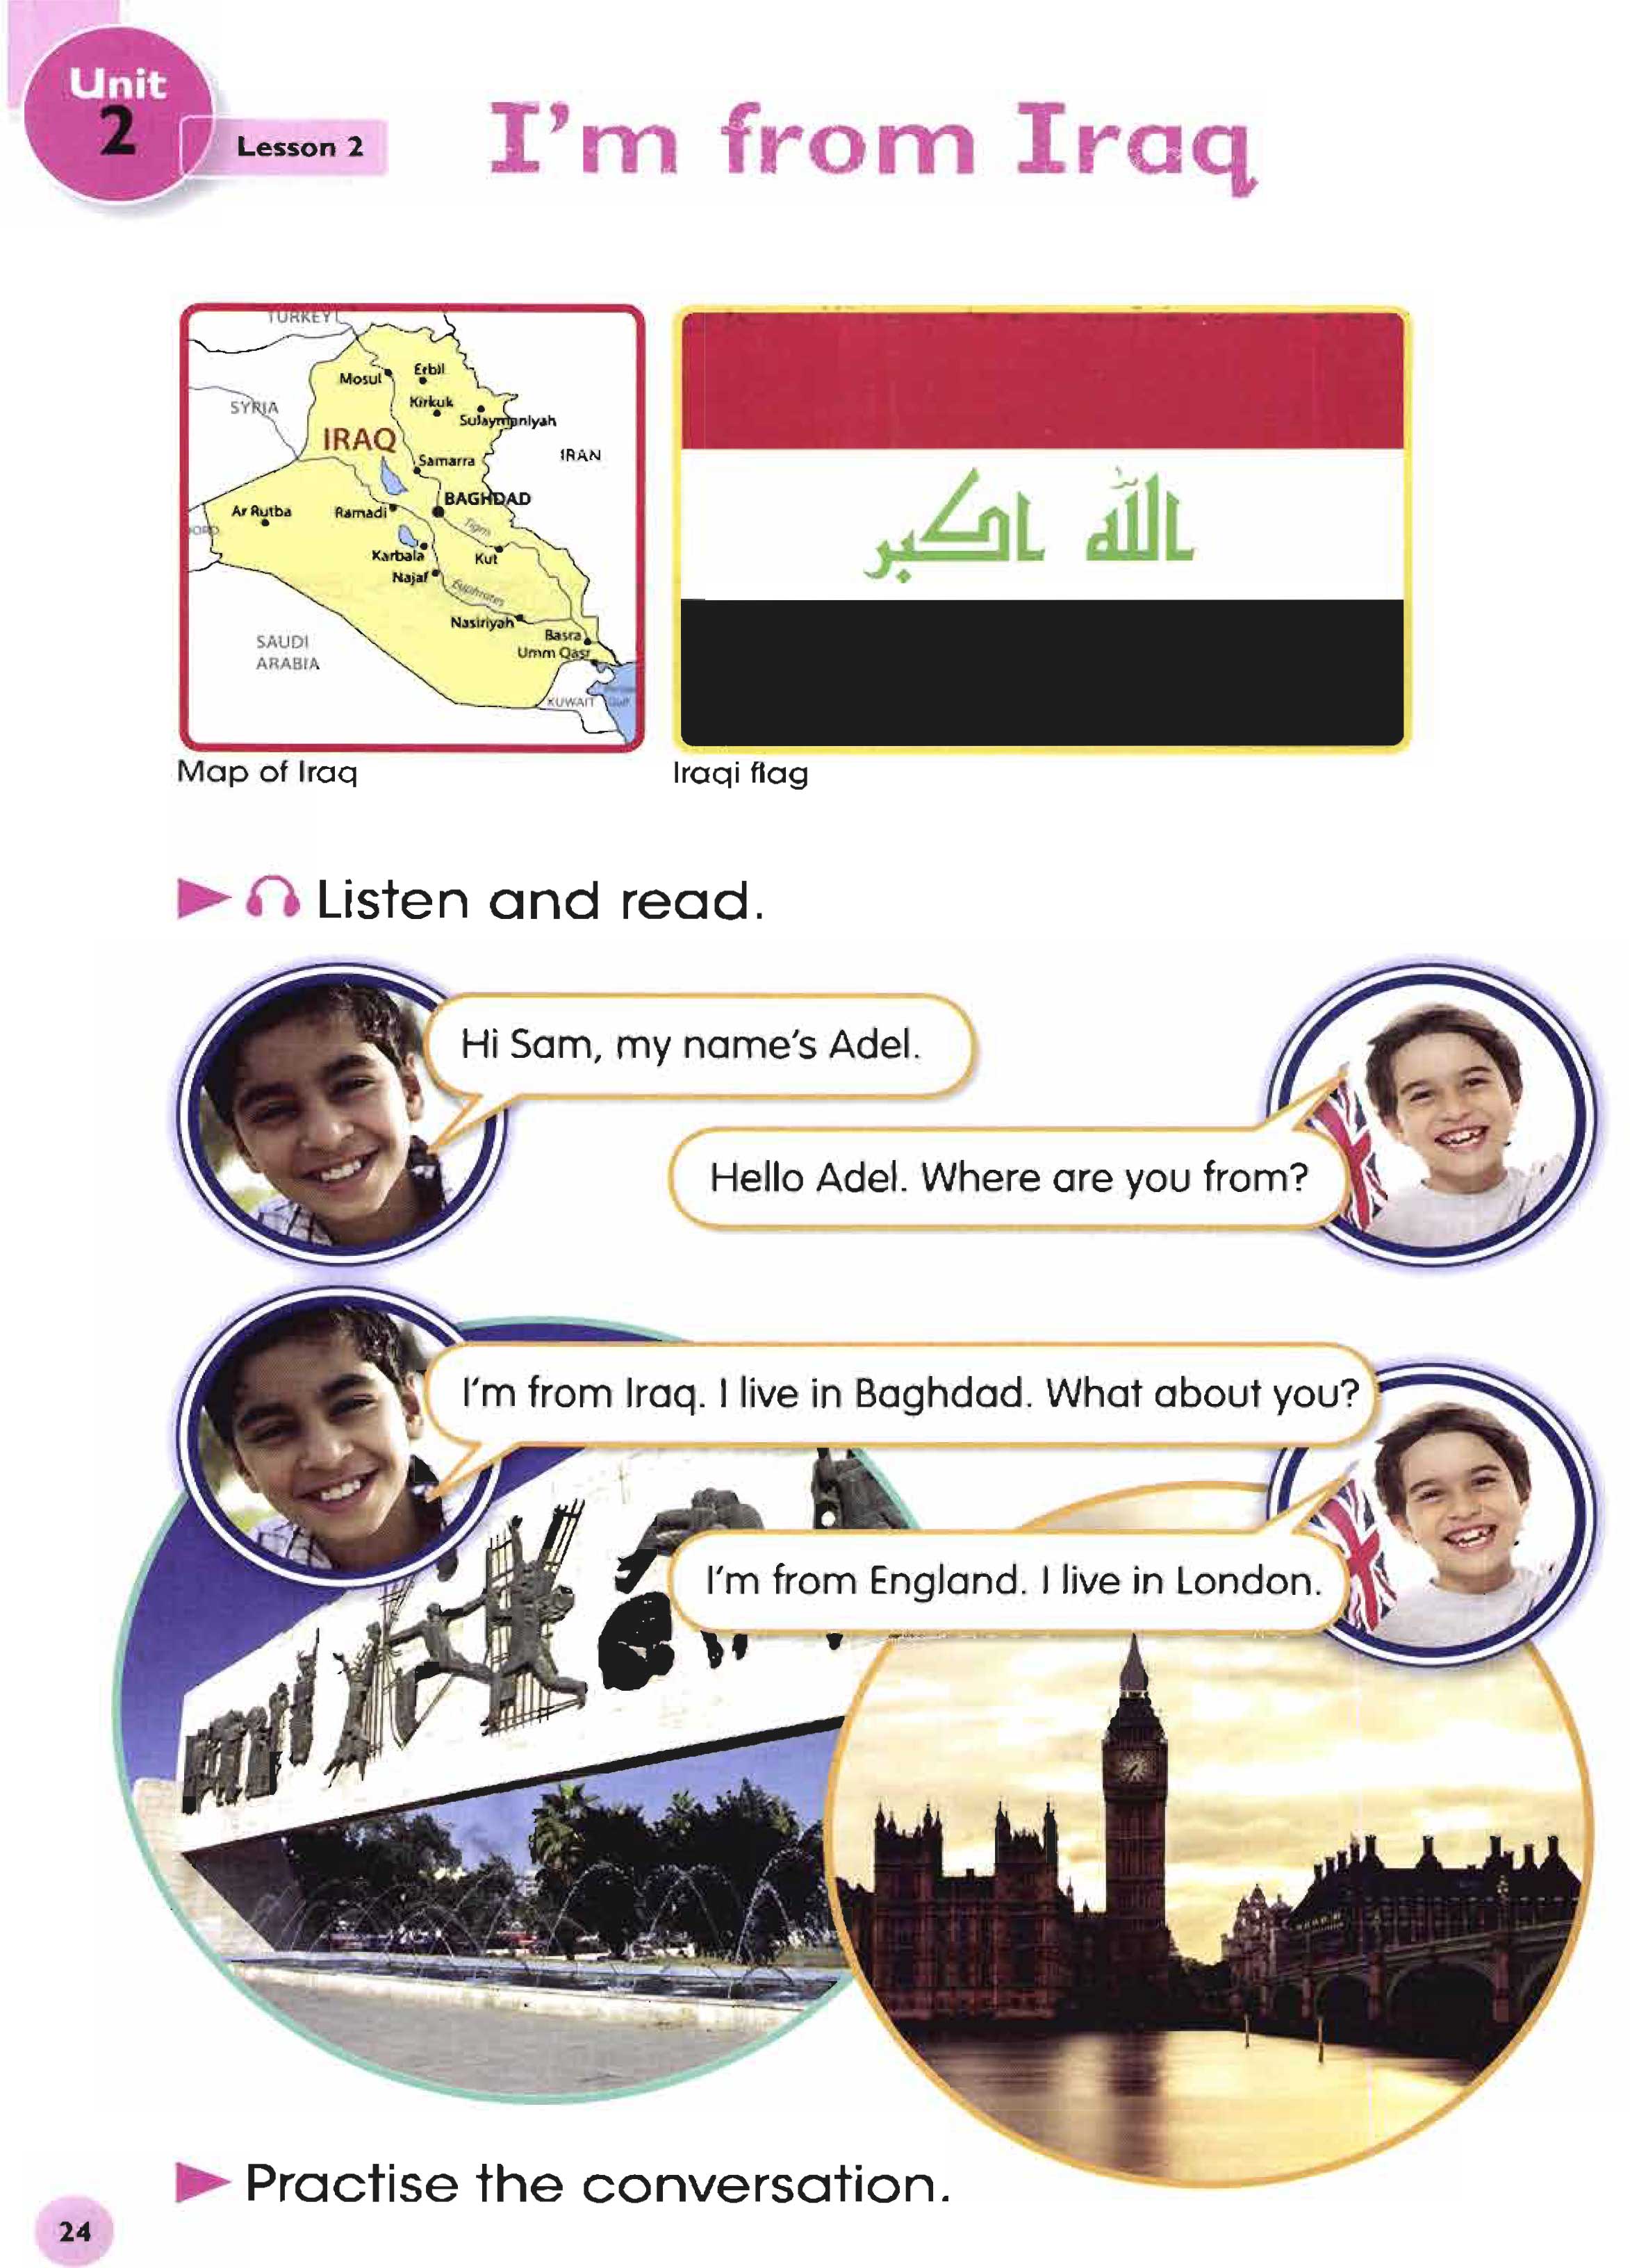 Lesson2:I'm from Iraq